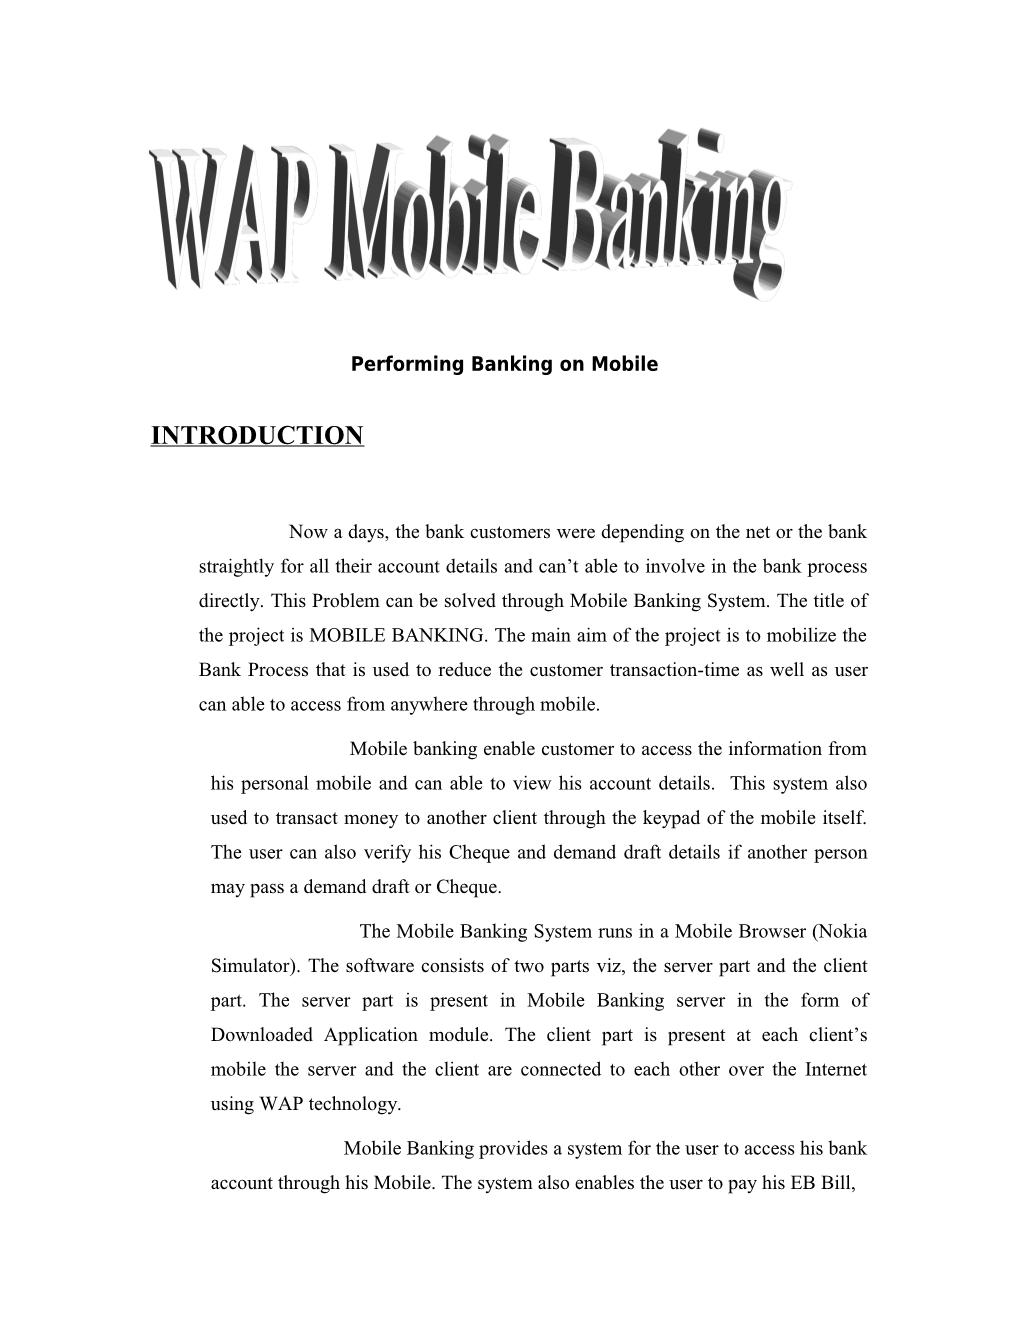 Performing Banking on Mobile